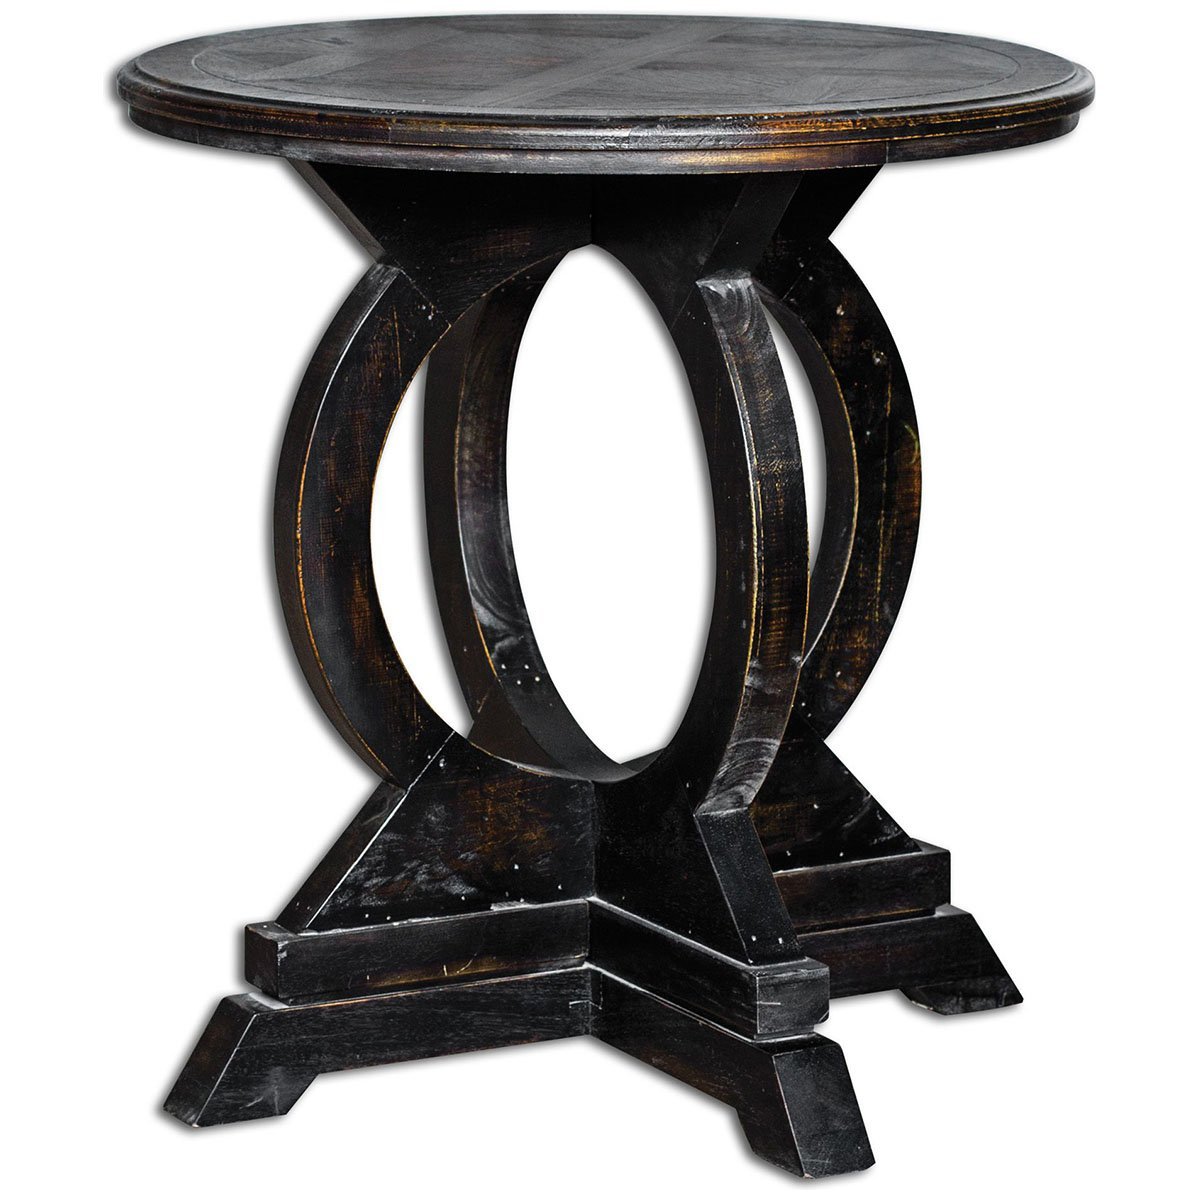 wrought iron accent tables house decorations projects design uttermost maiva table black kitchen end rectangle patio dining with leaf living room unfinished console marble and